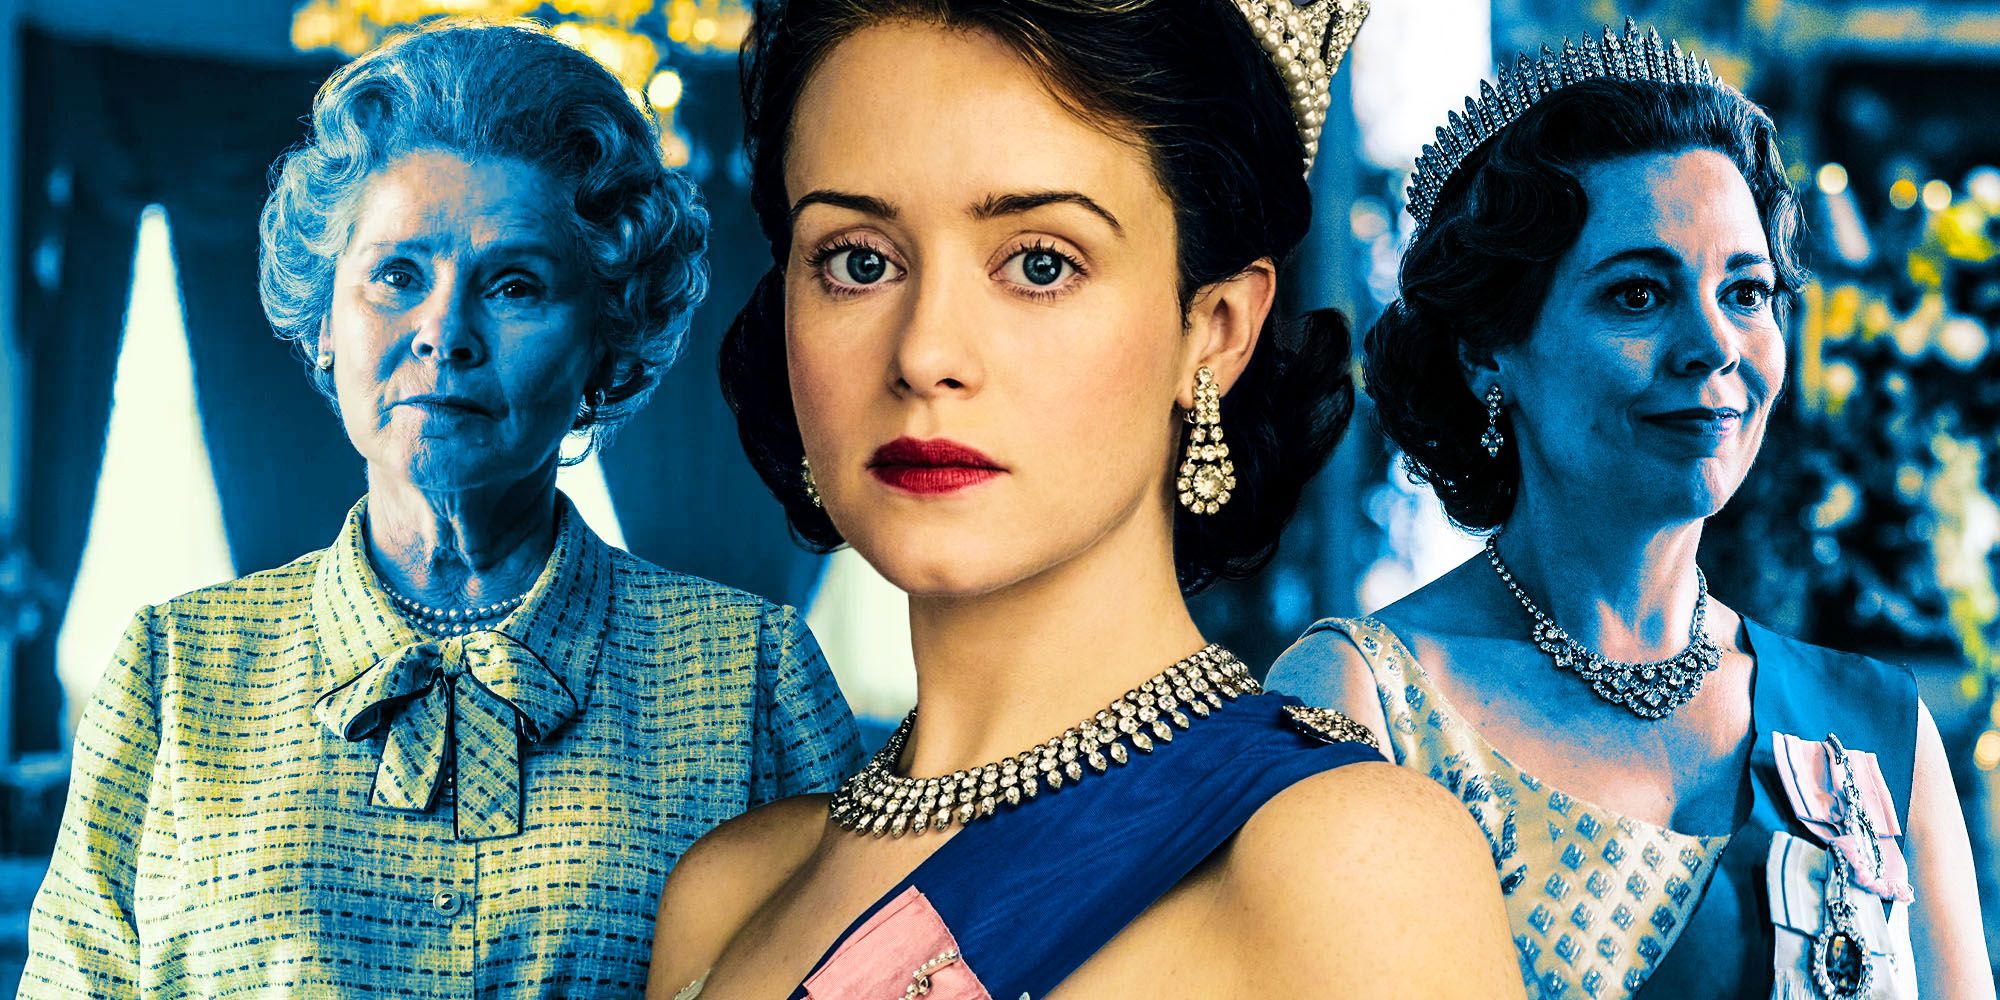 The Crown: All 4 Queen Elizabeth Actresses Explained